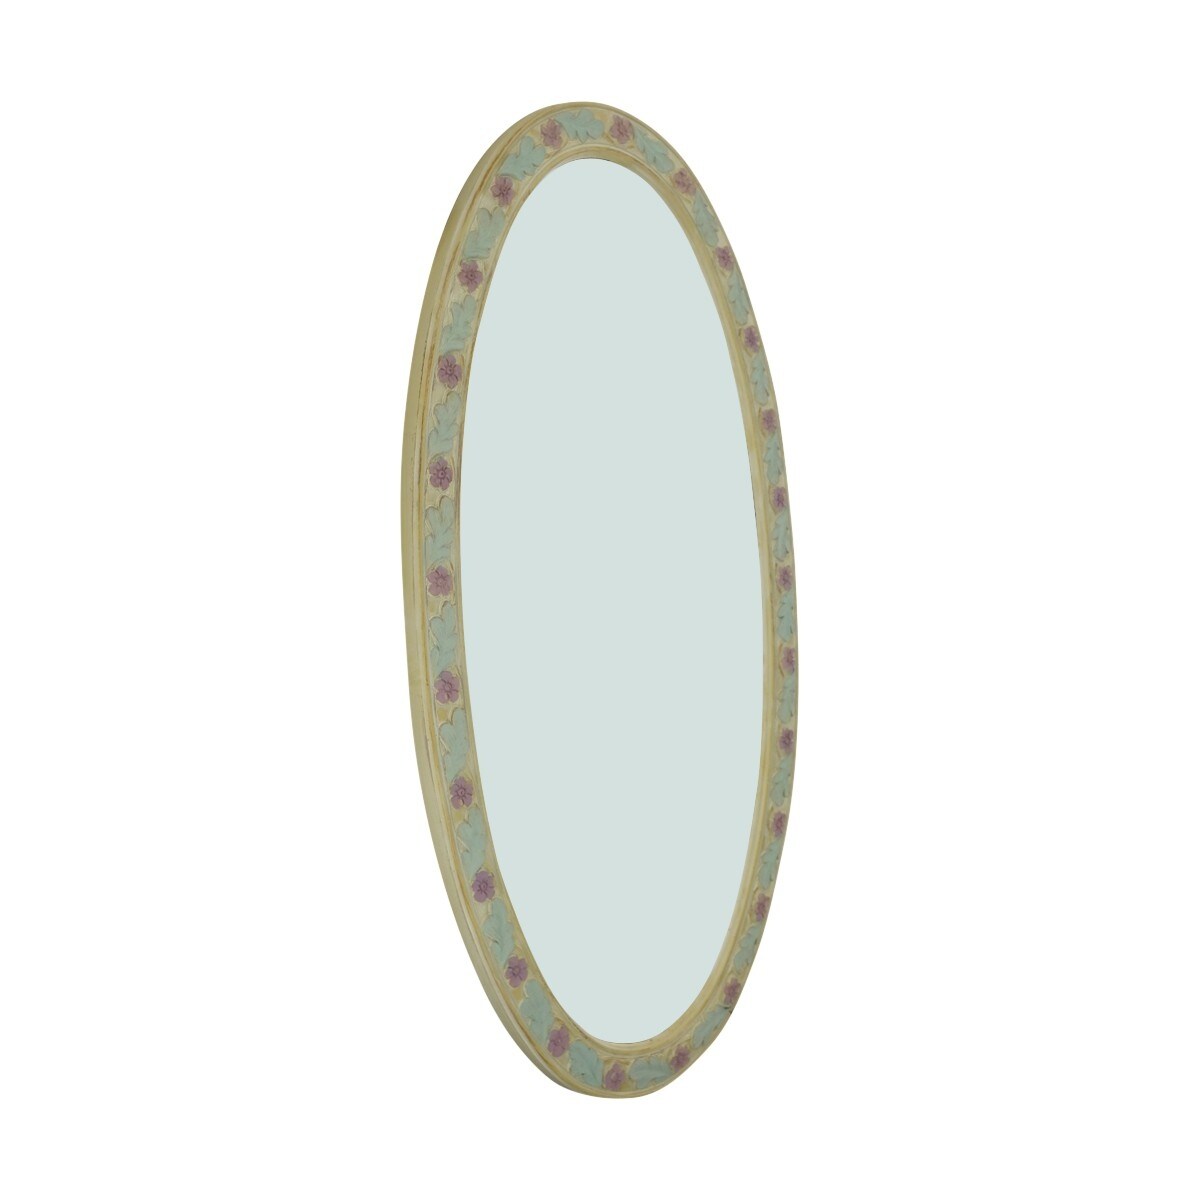 Oval Mirror Victorian Hard-Painted Floral Design made in U.S.A. Renovators Supply